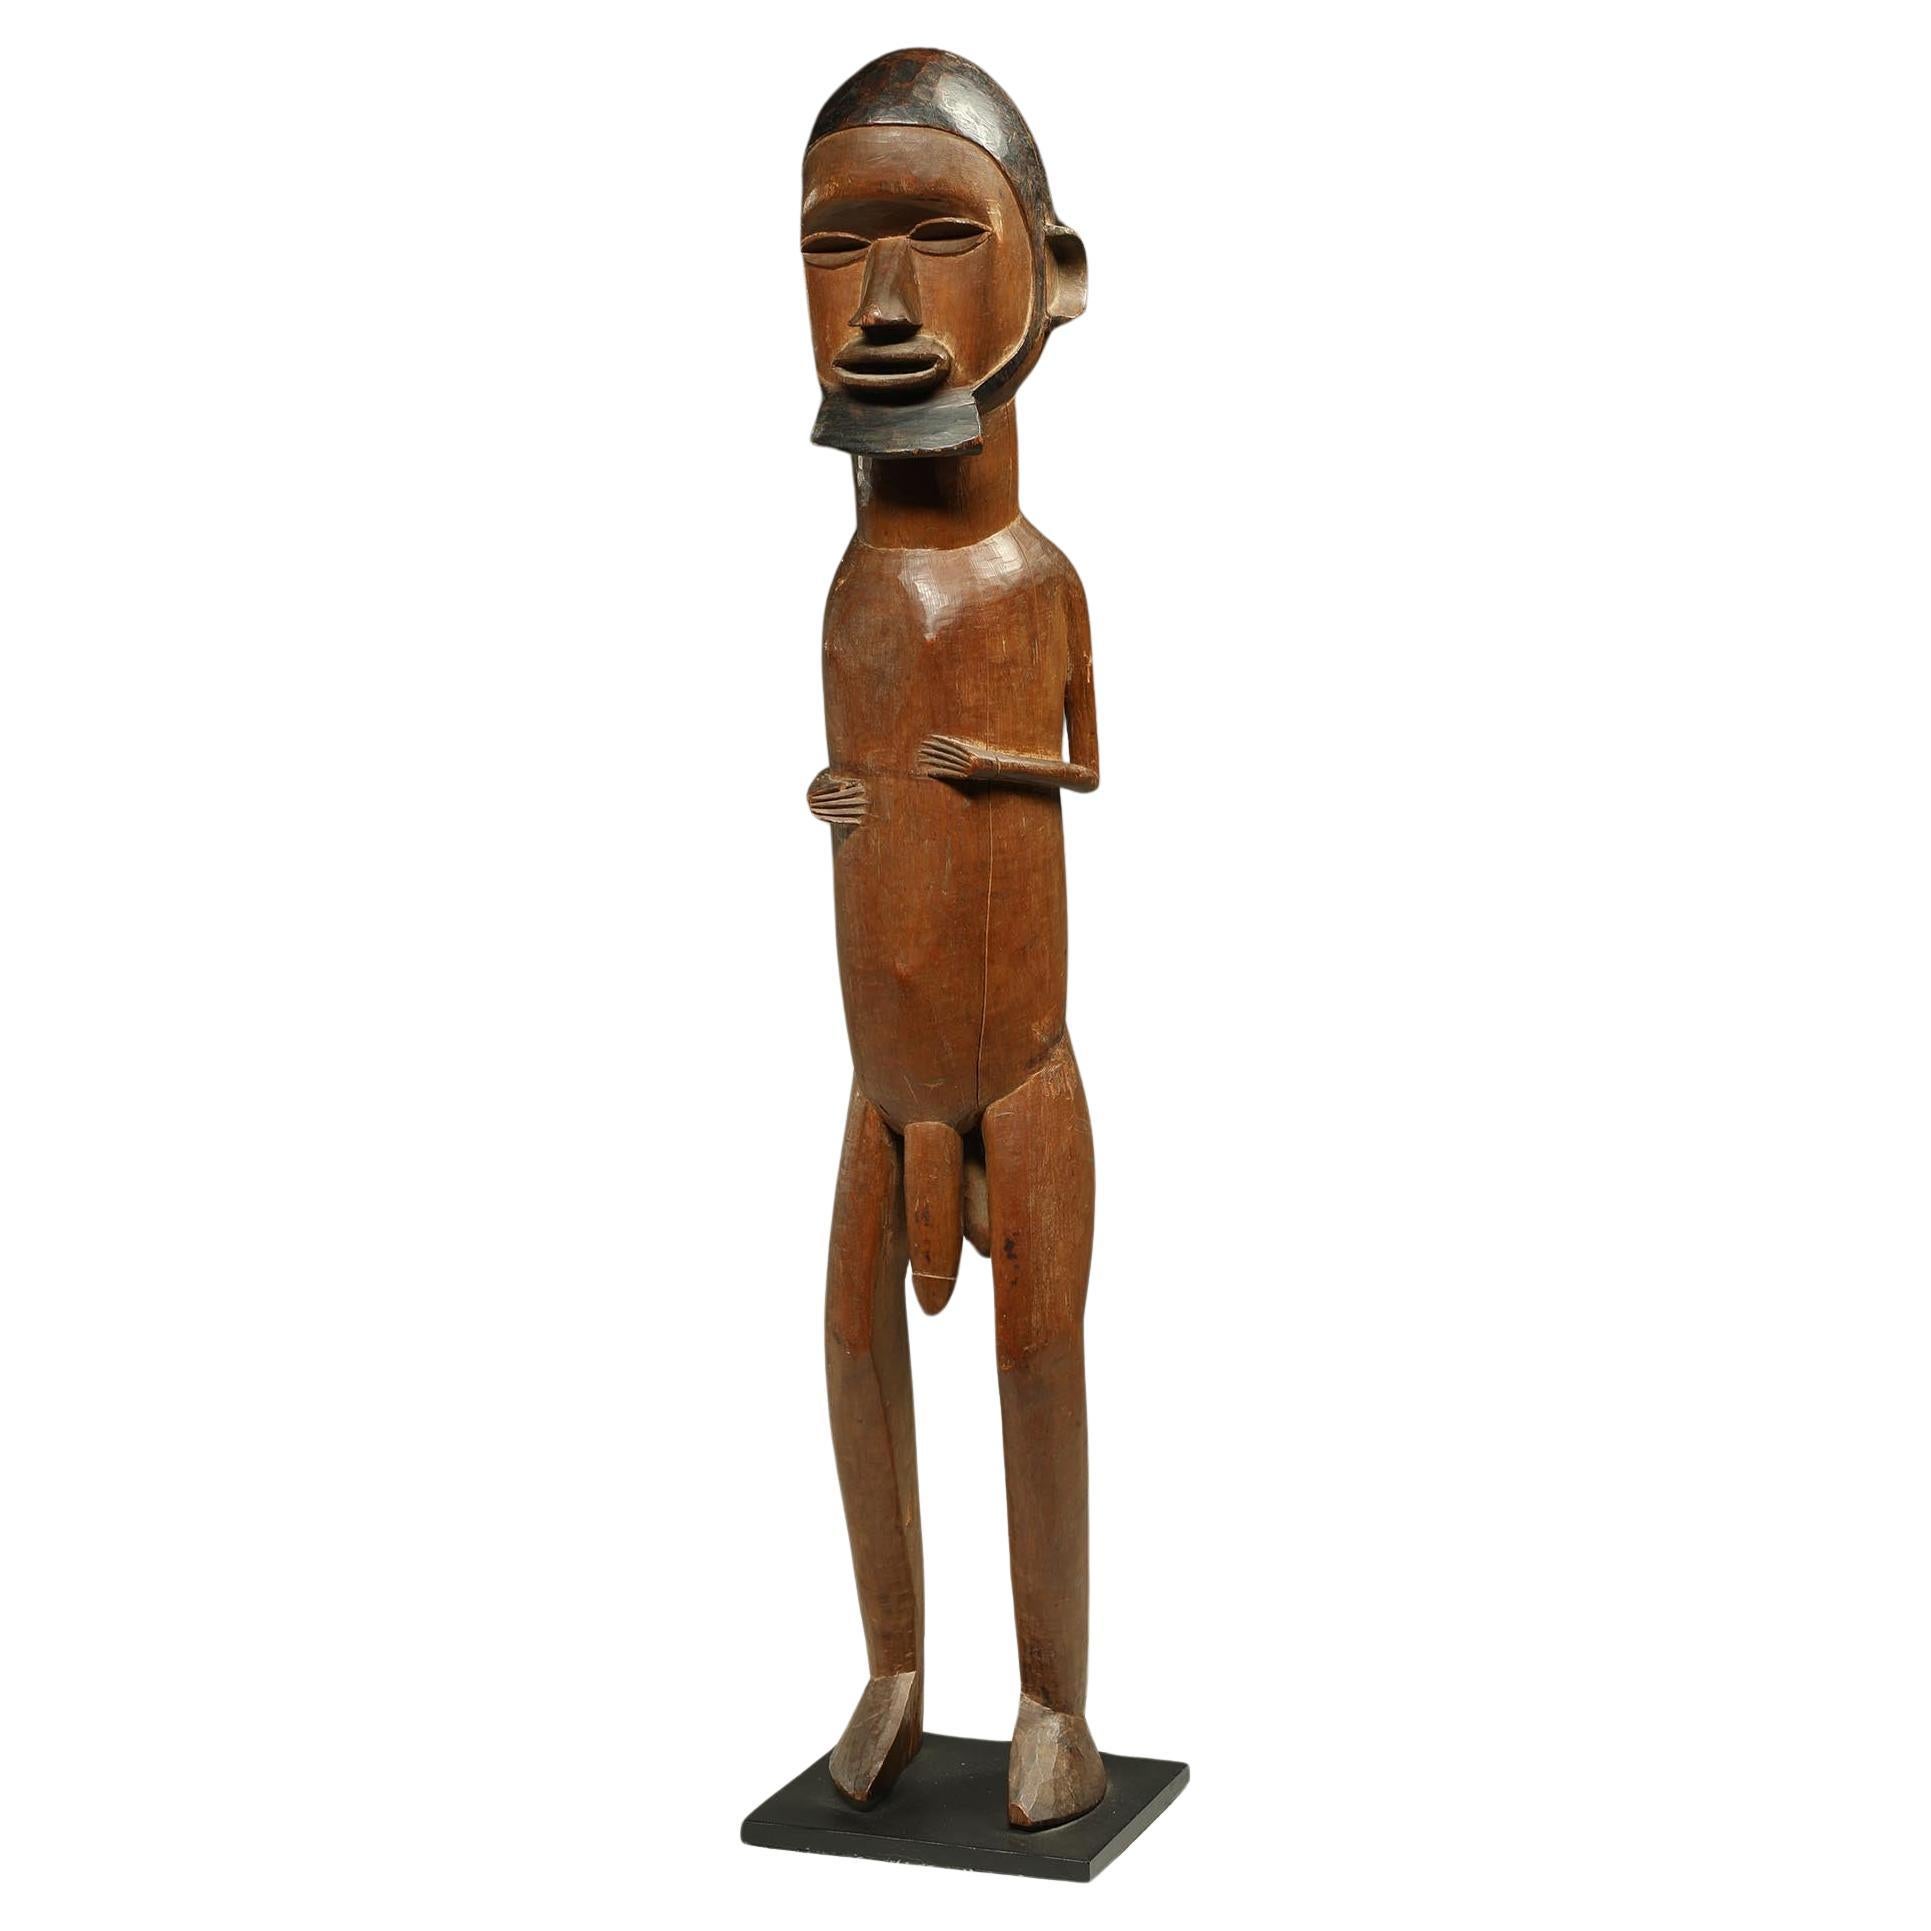 Large standing male Teke figure with expressive face, beard, Congo, DRC Africa